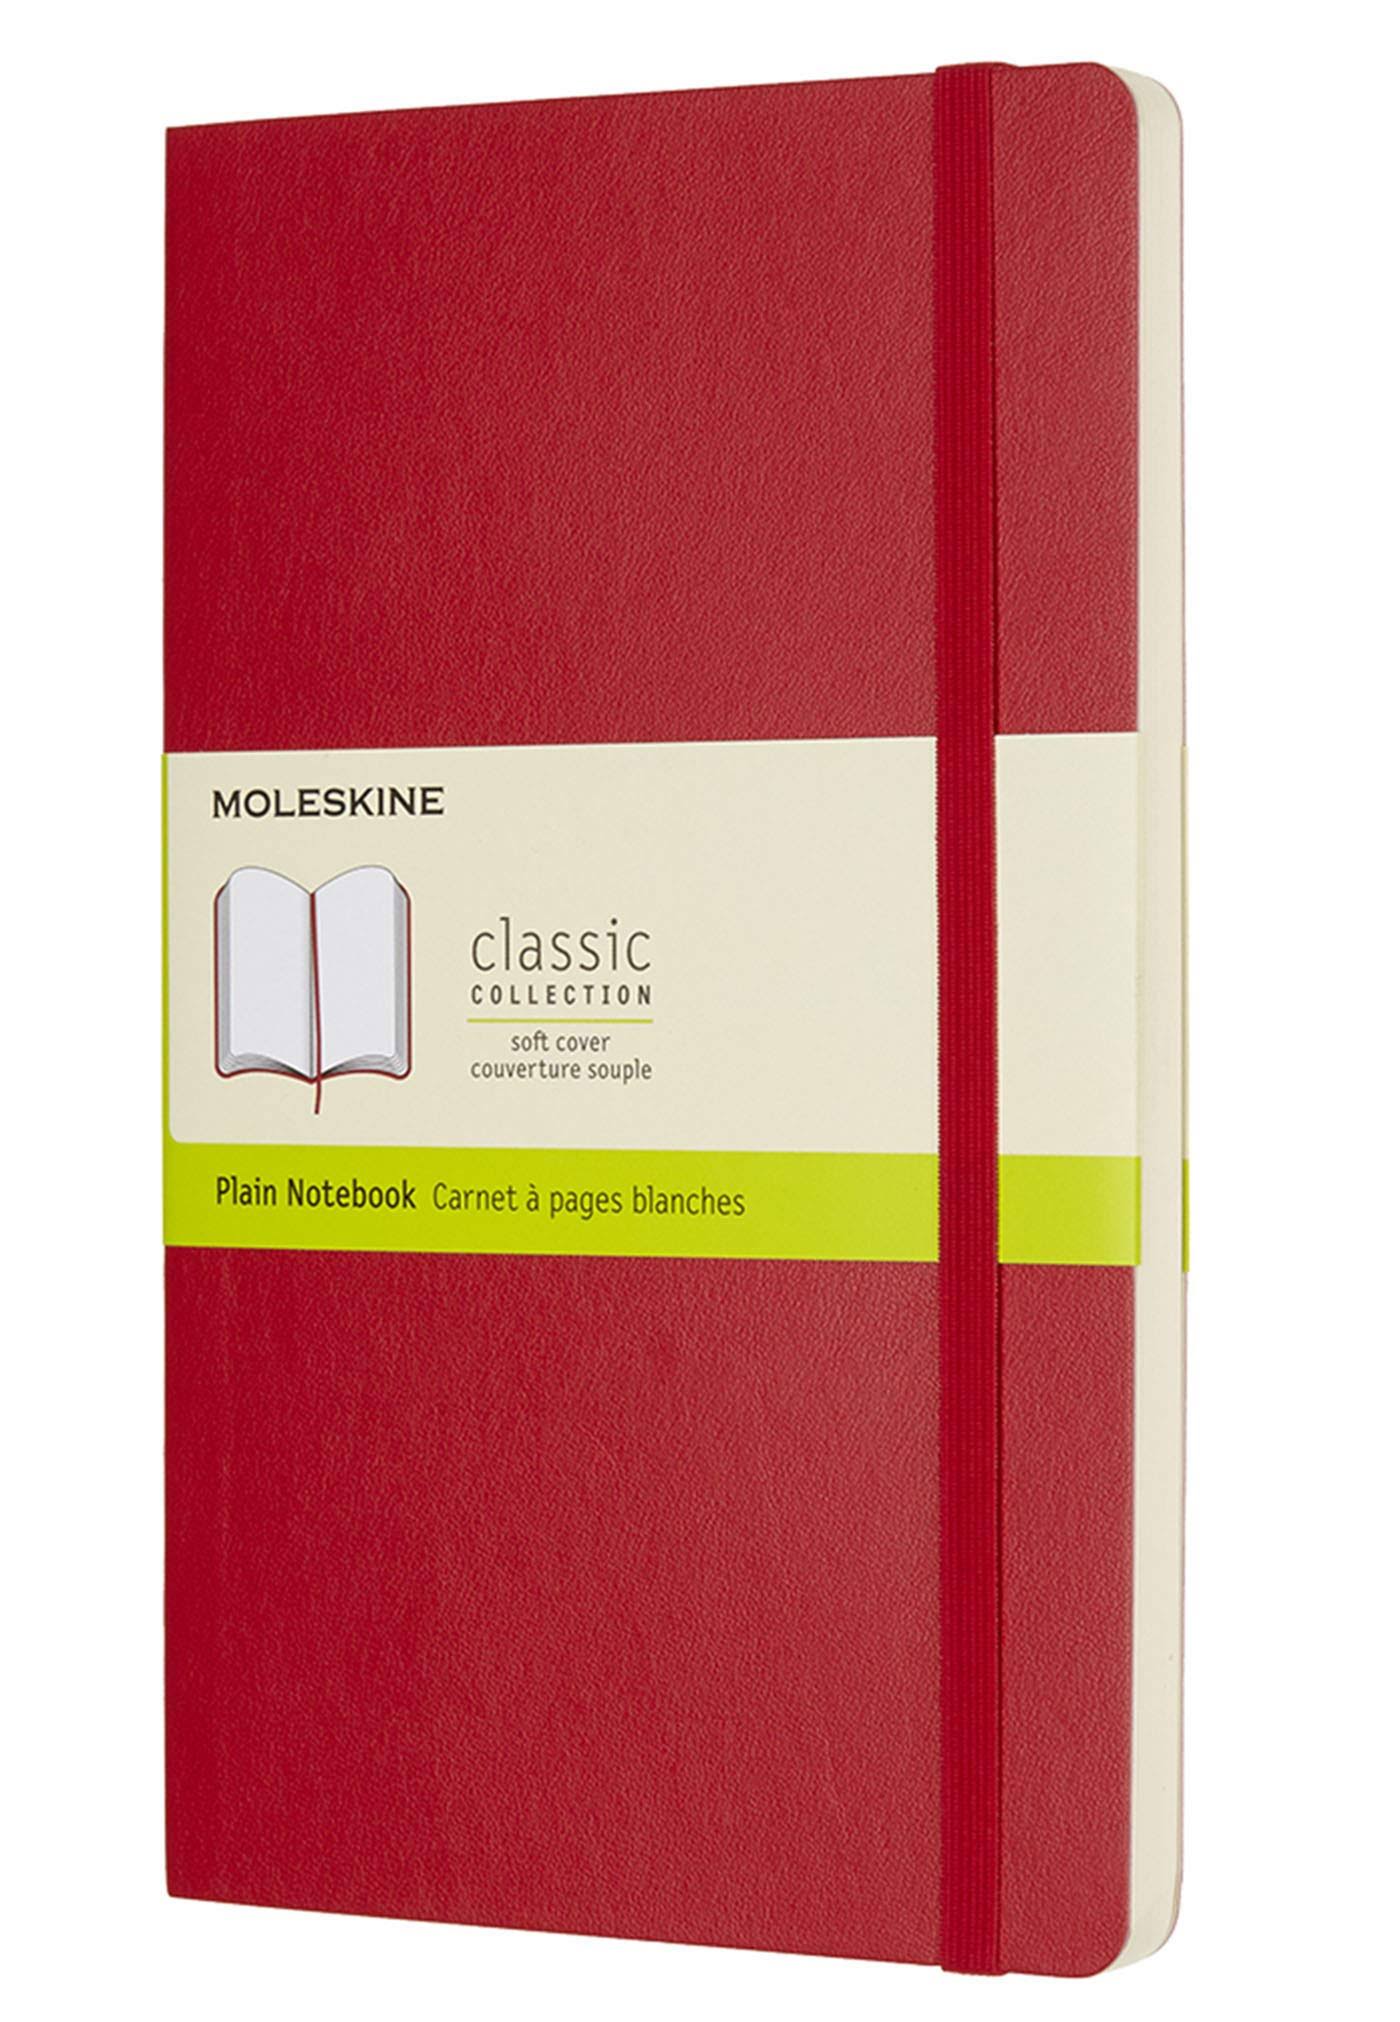 Moleskine Classic Notebook - Large, Scarlet Red, Soft Cover